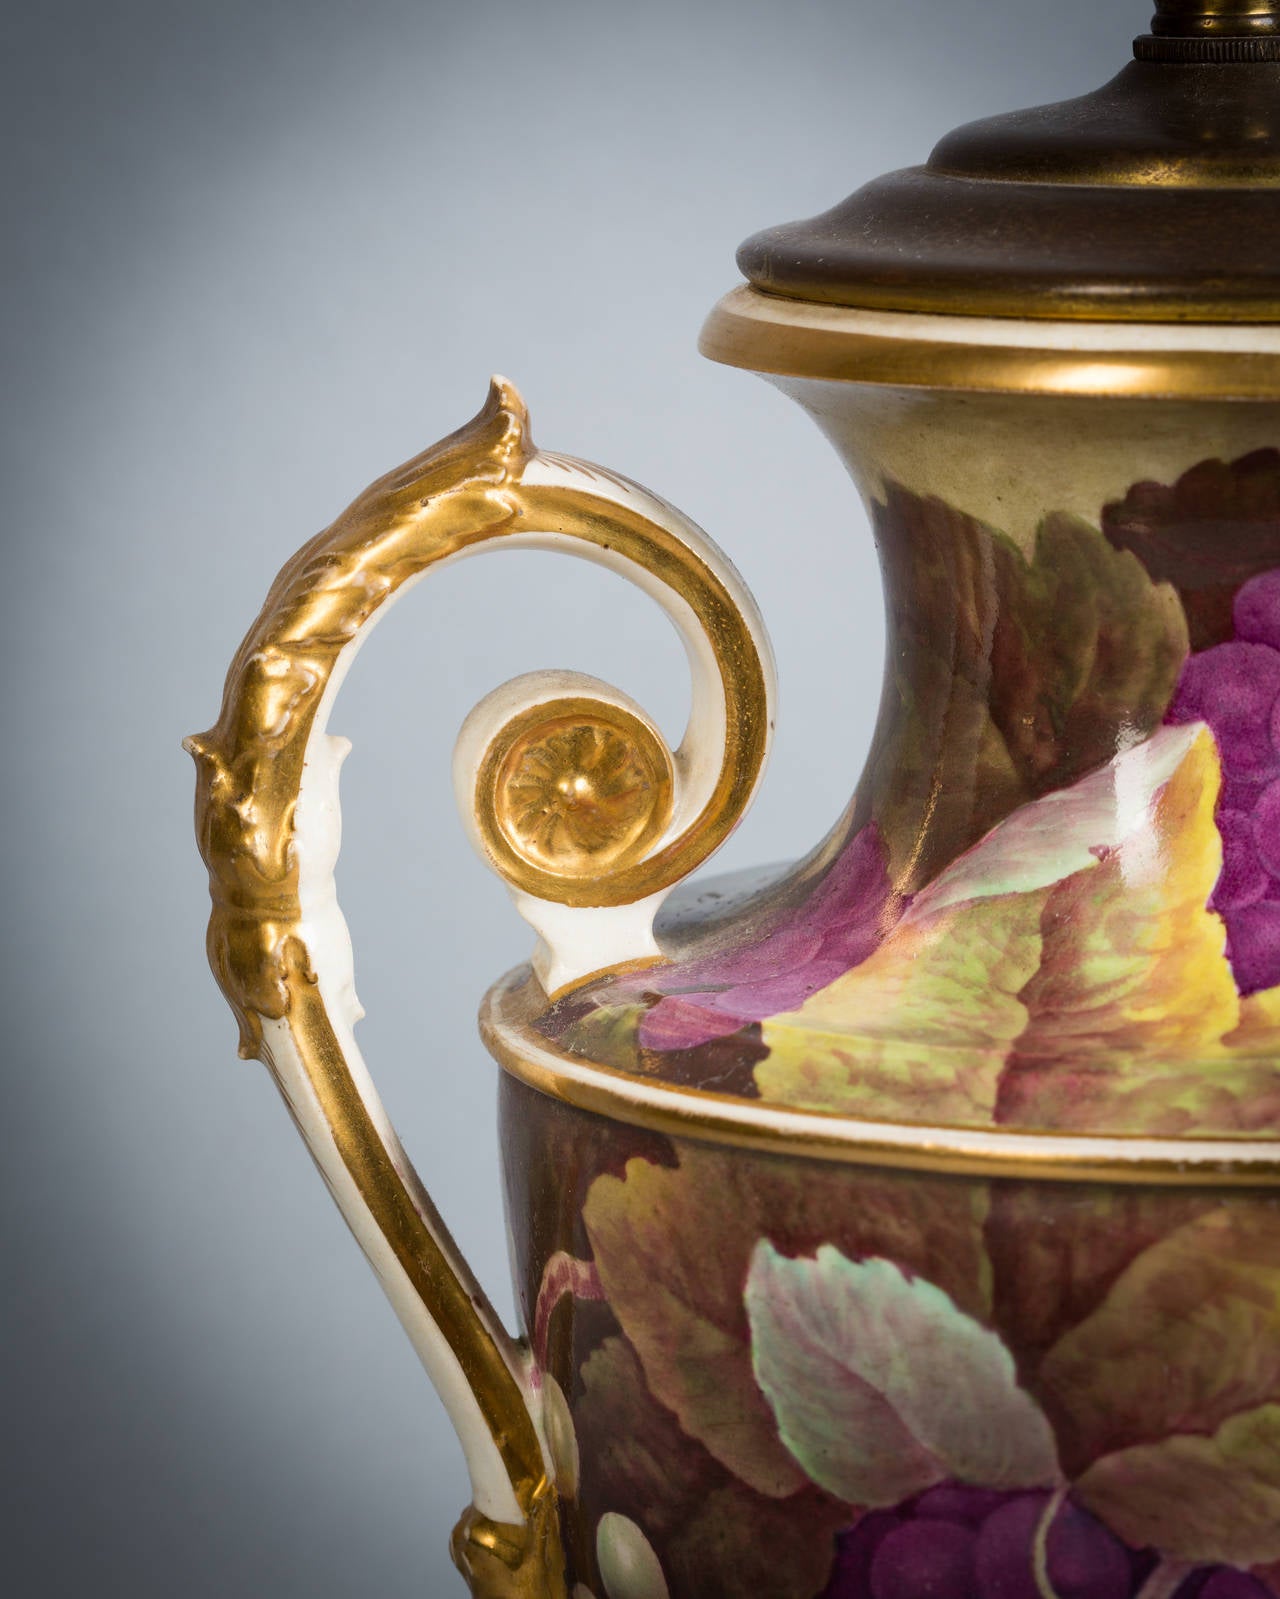 English porcelain vase mounted as lamp, derby, circa 1826. Attributed to artist Thomas Steele.